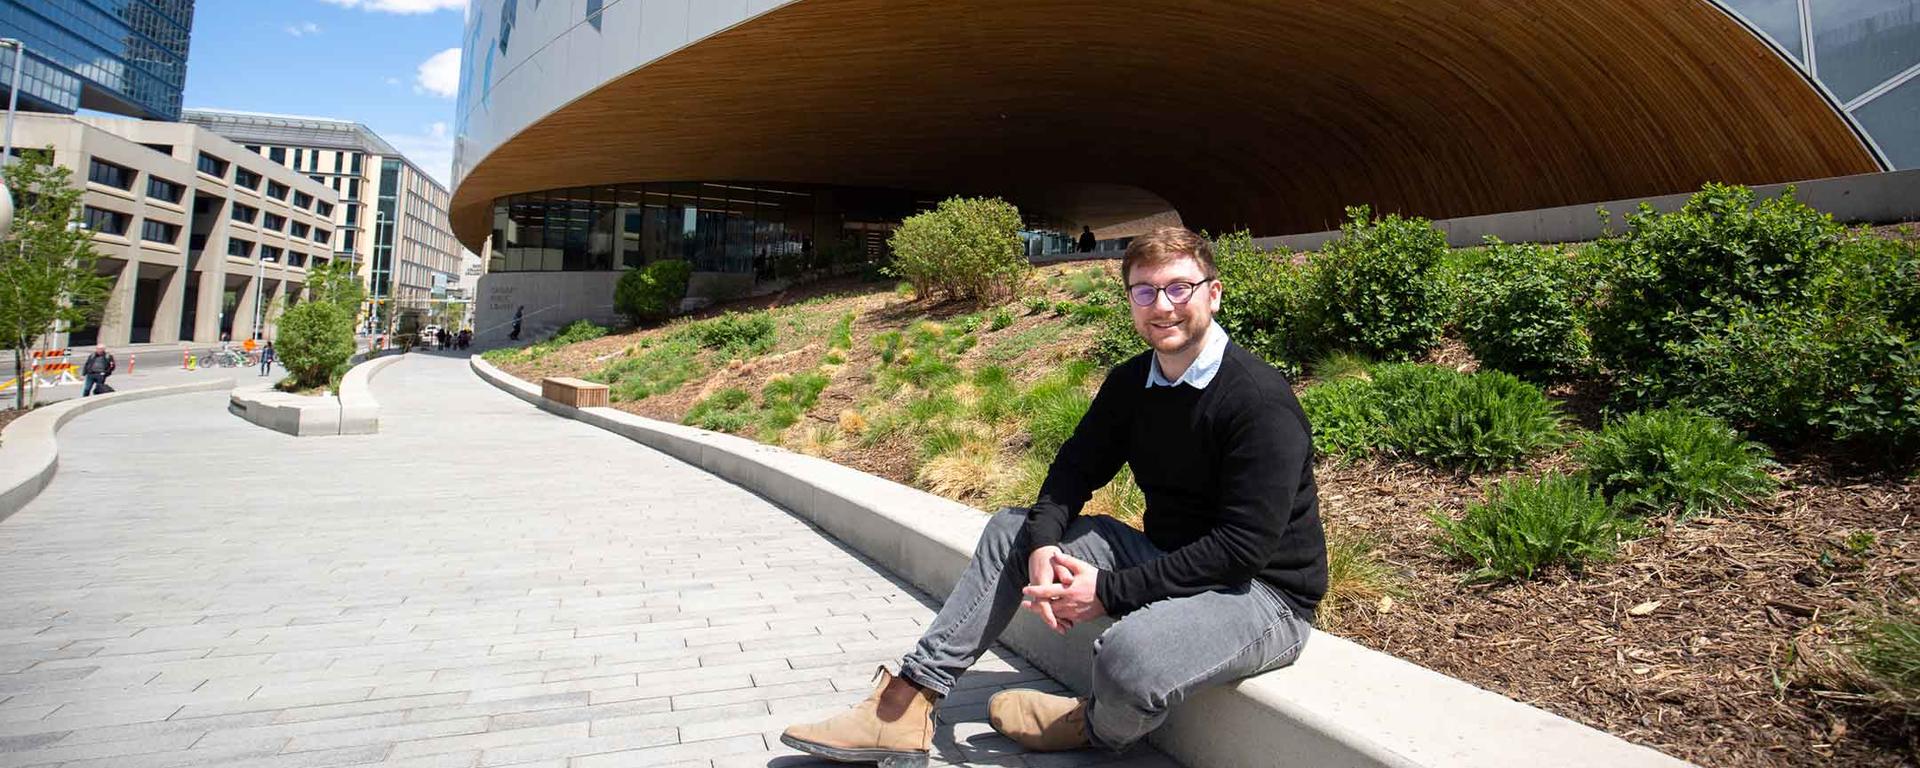 Russell Copley, MSc Geography, sits in front of Calgary's main library branch